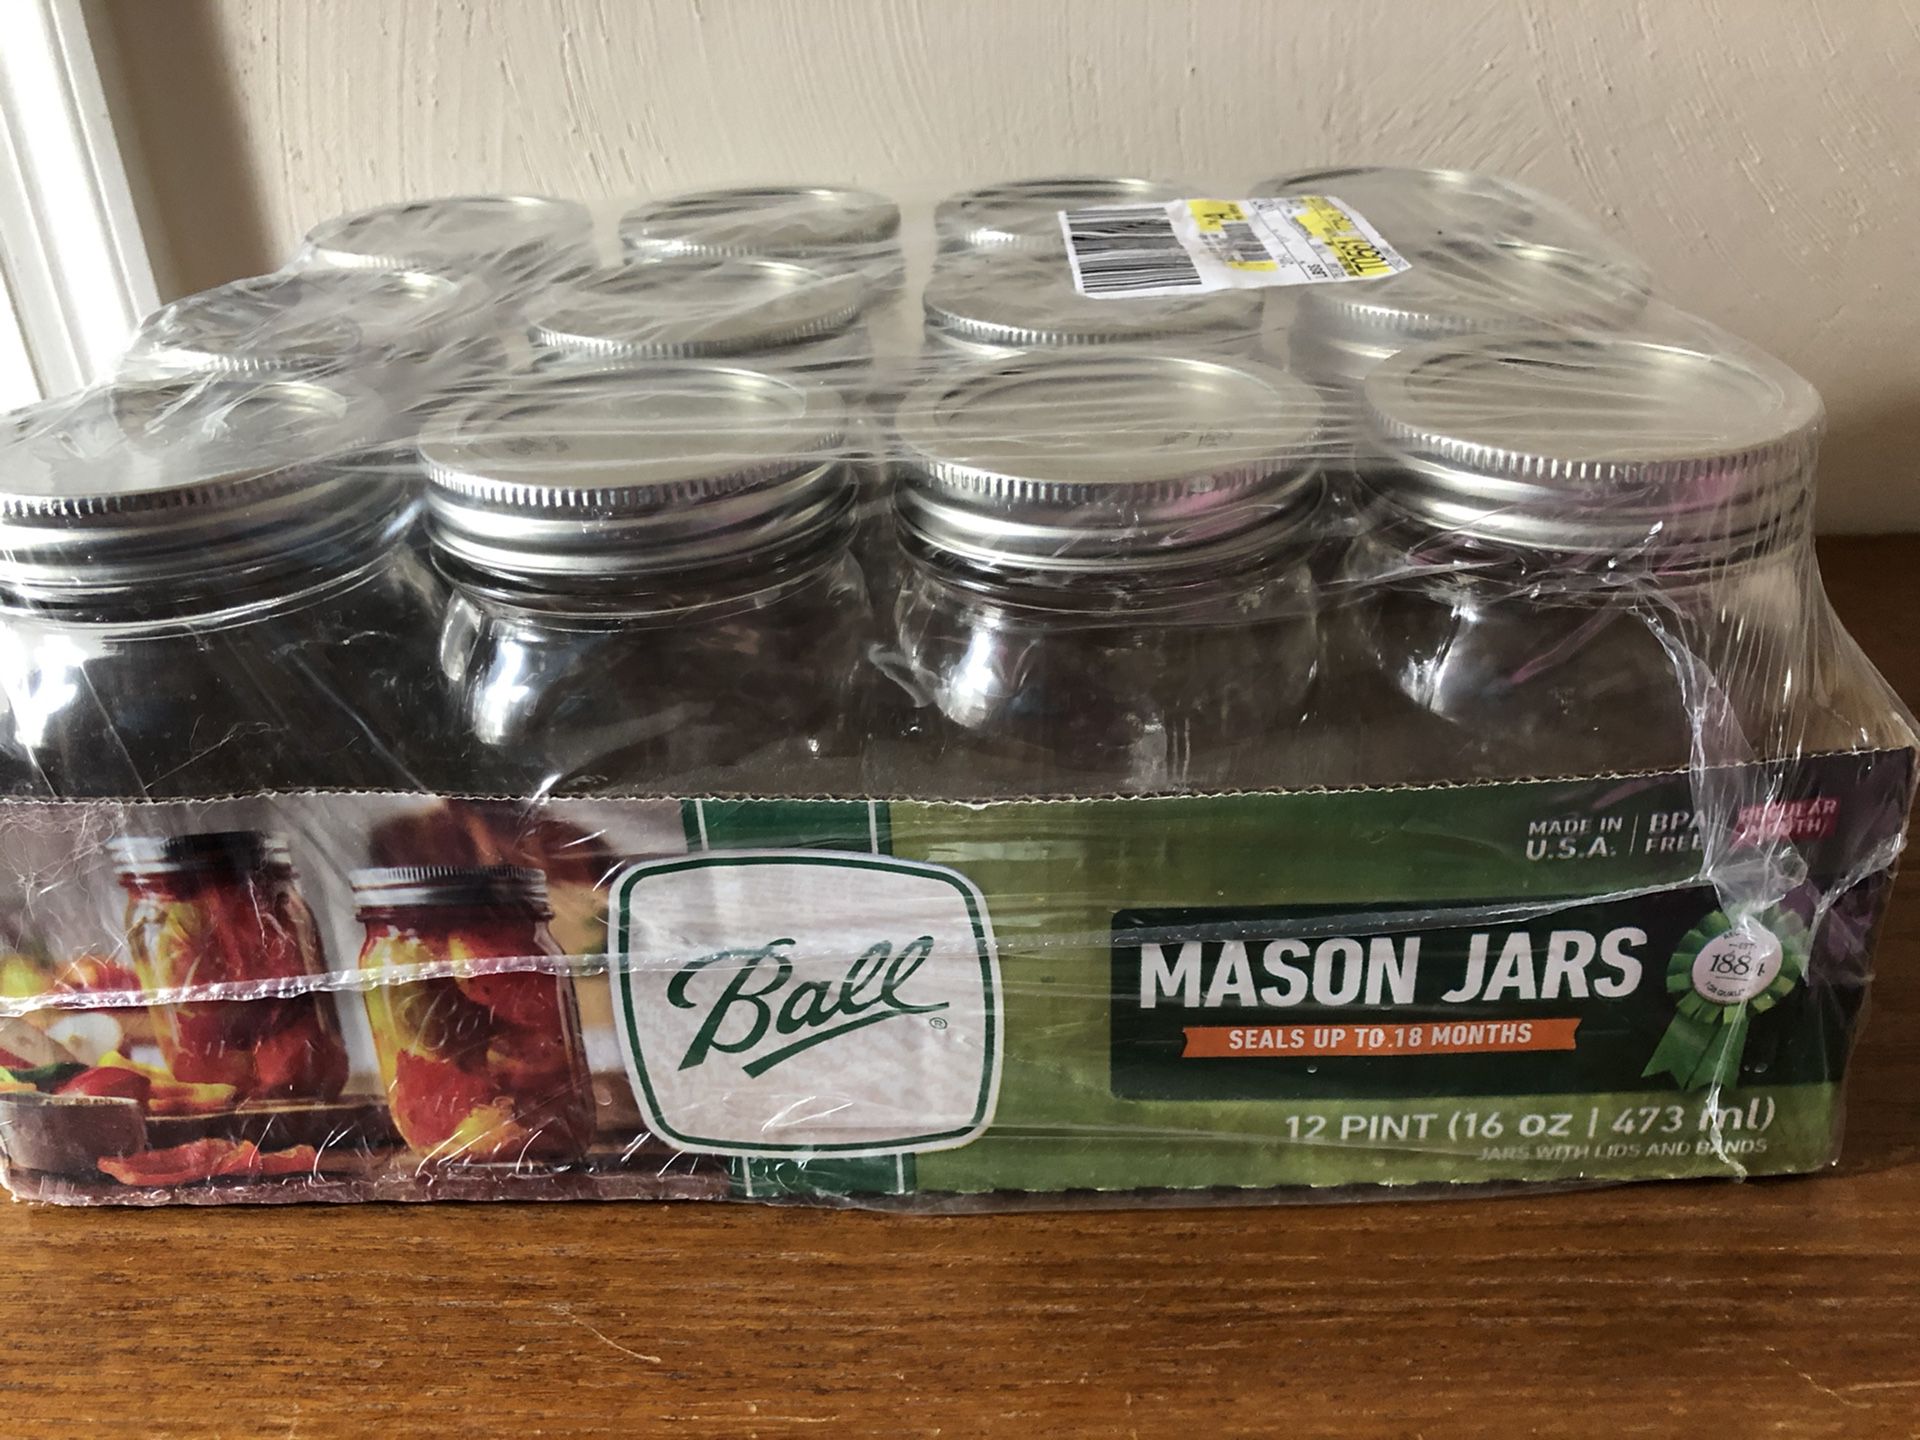 Mason Jars, New In package